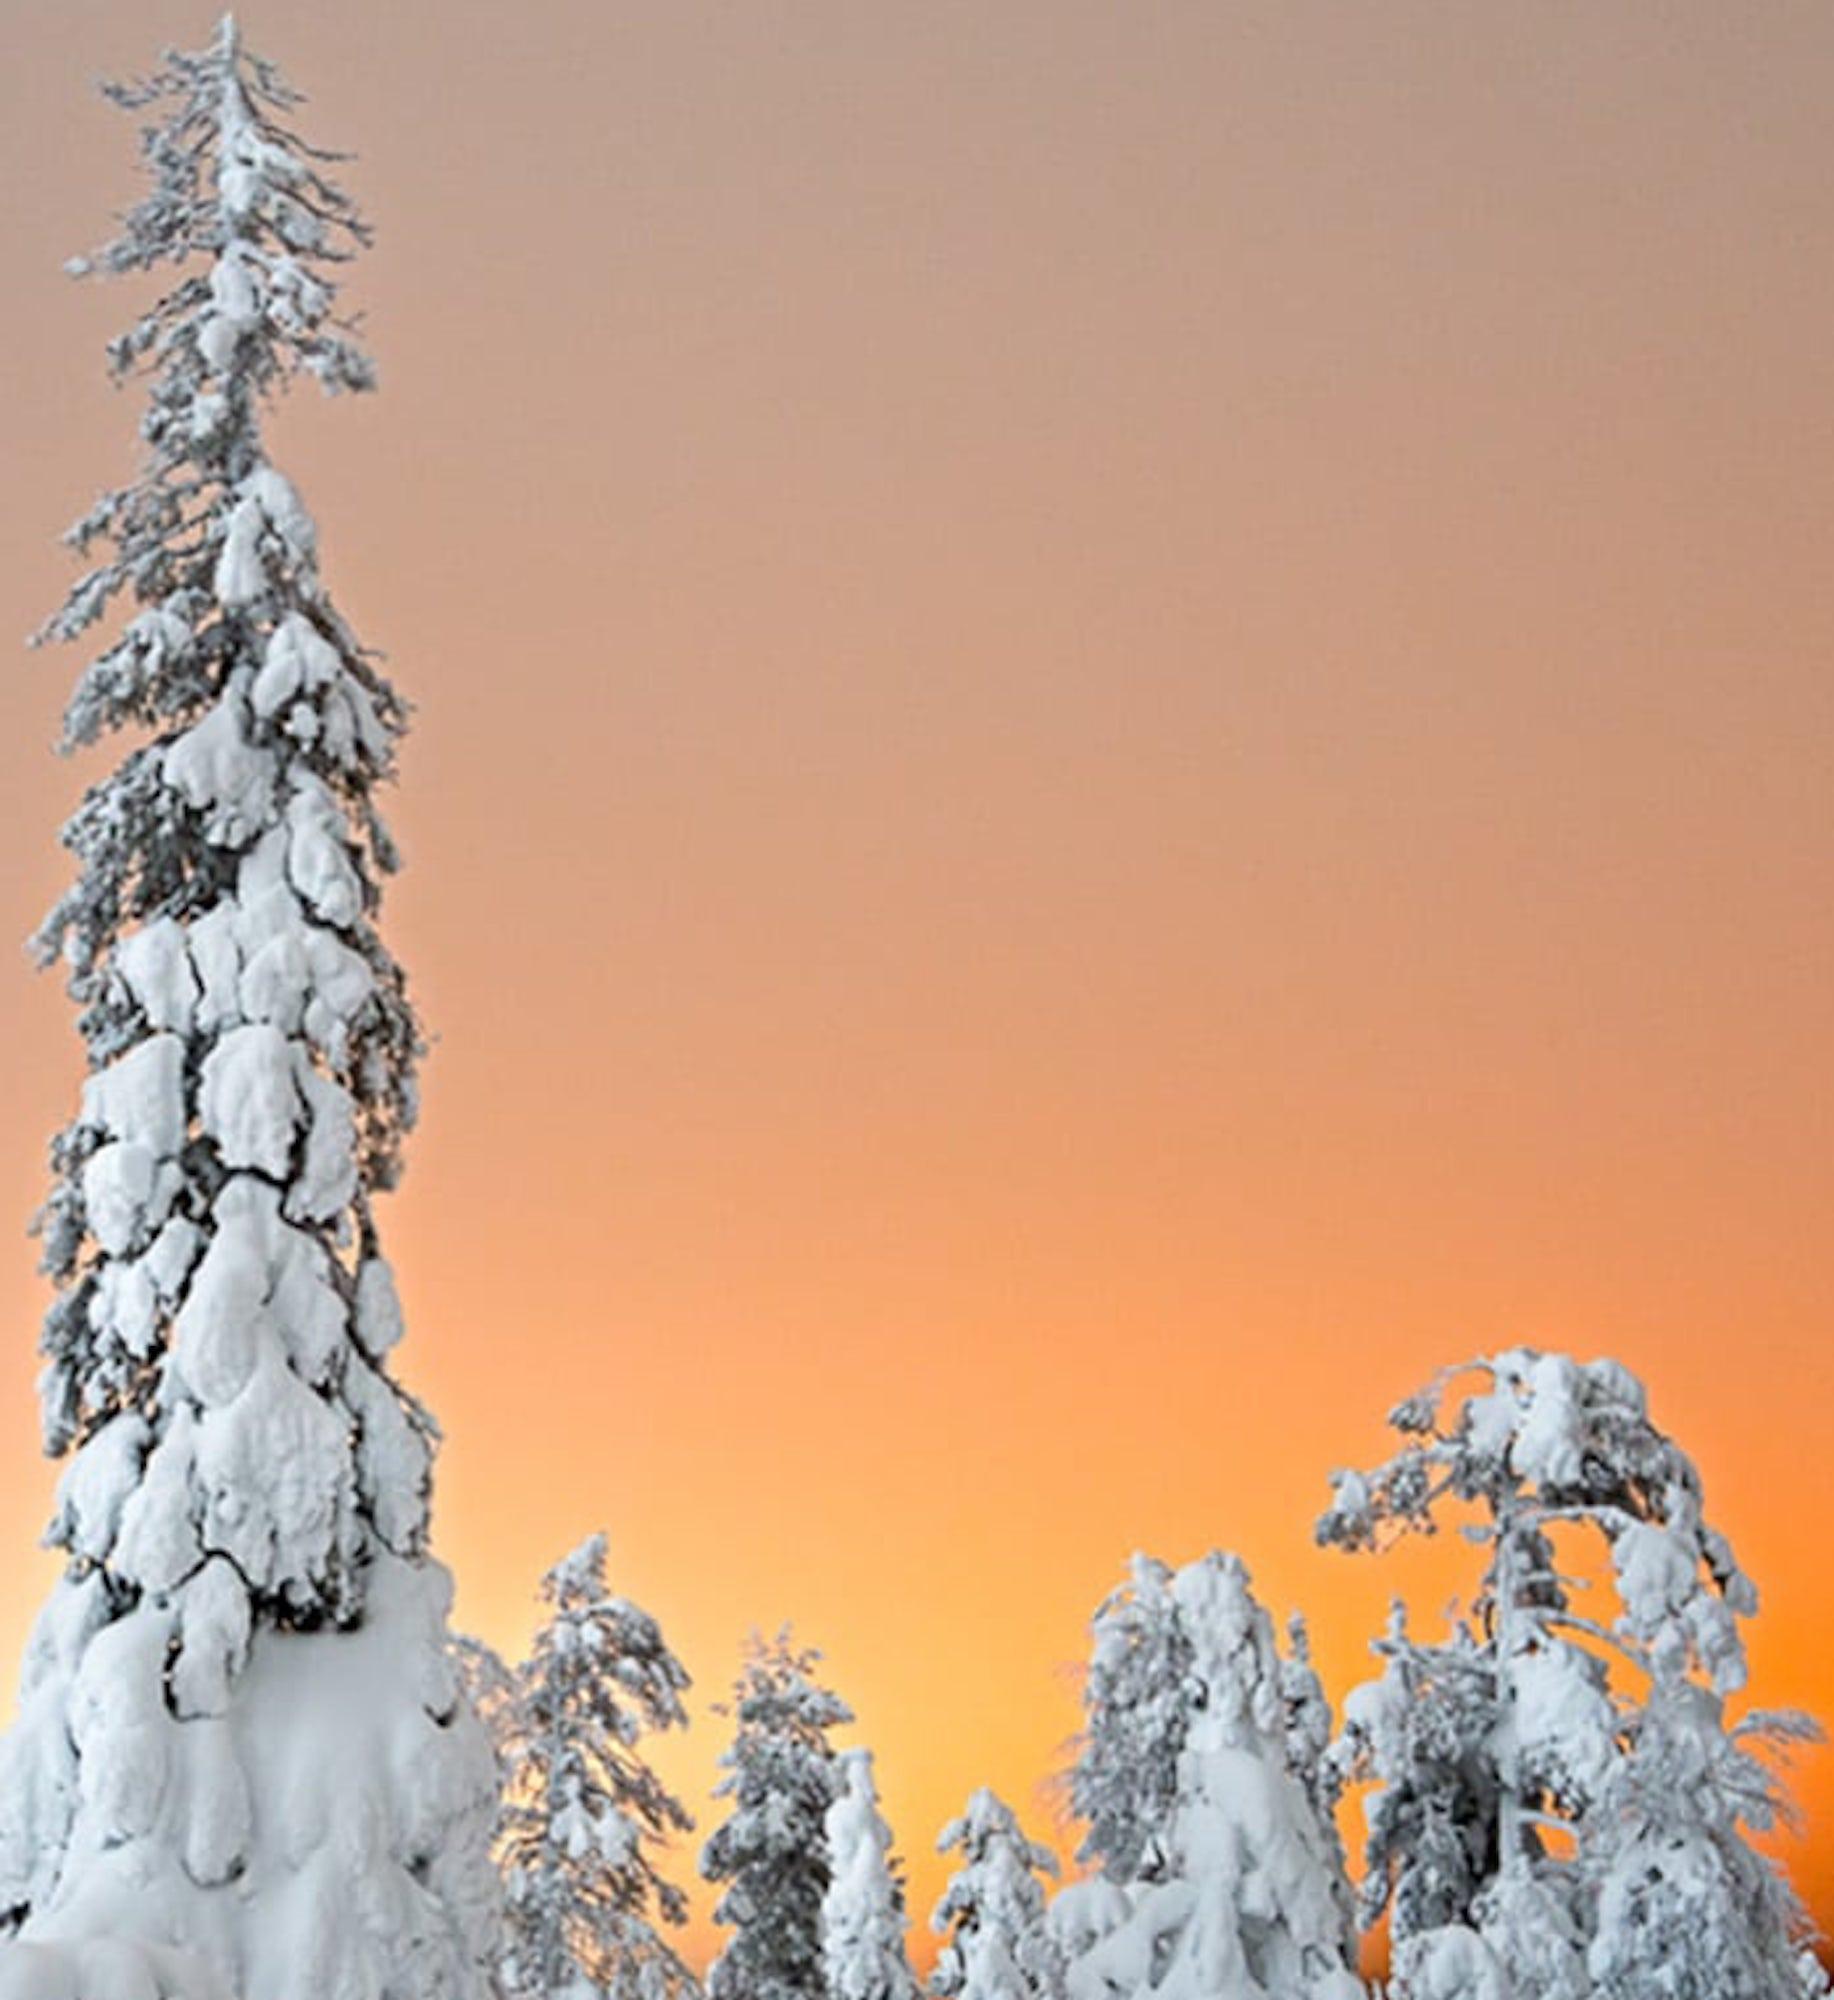 Pine Sunset by Luca Marziale - Contemporary photography, snowy landscape, winter For Sale 3